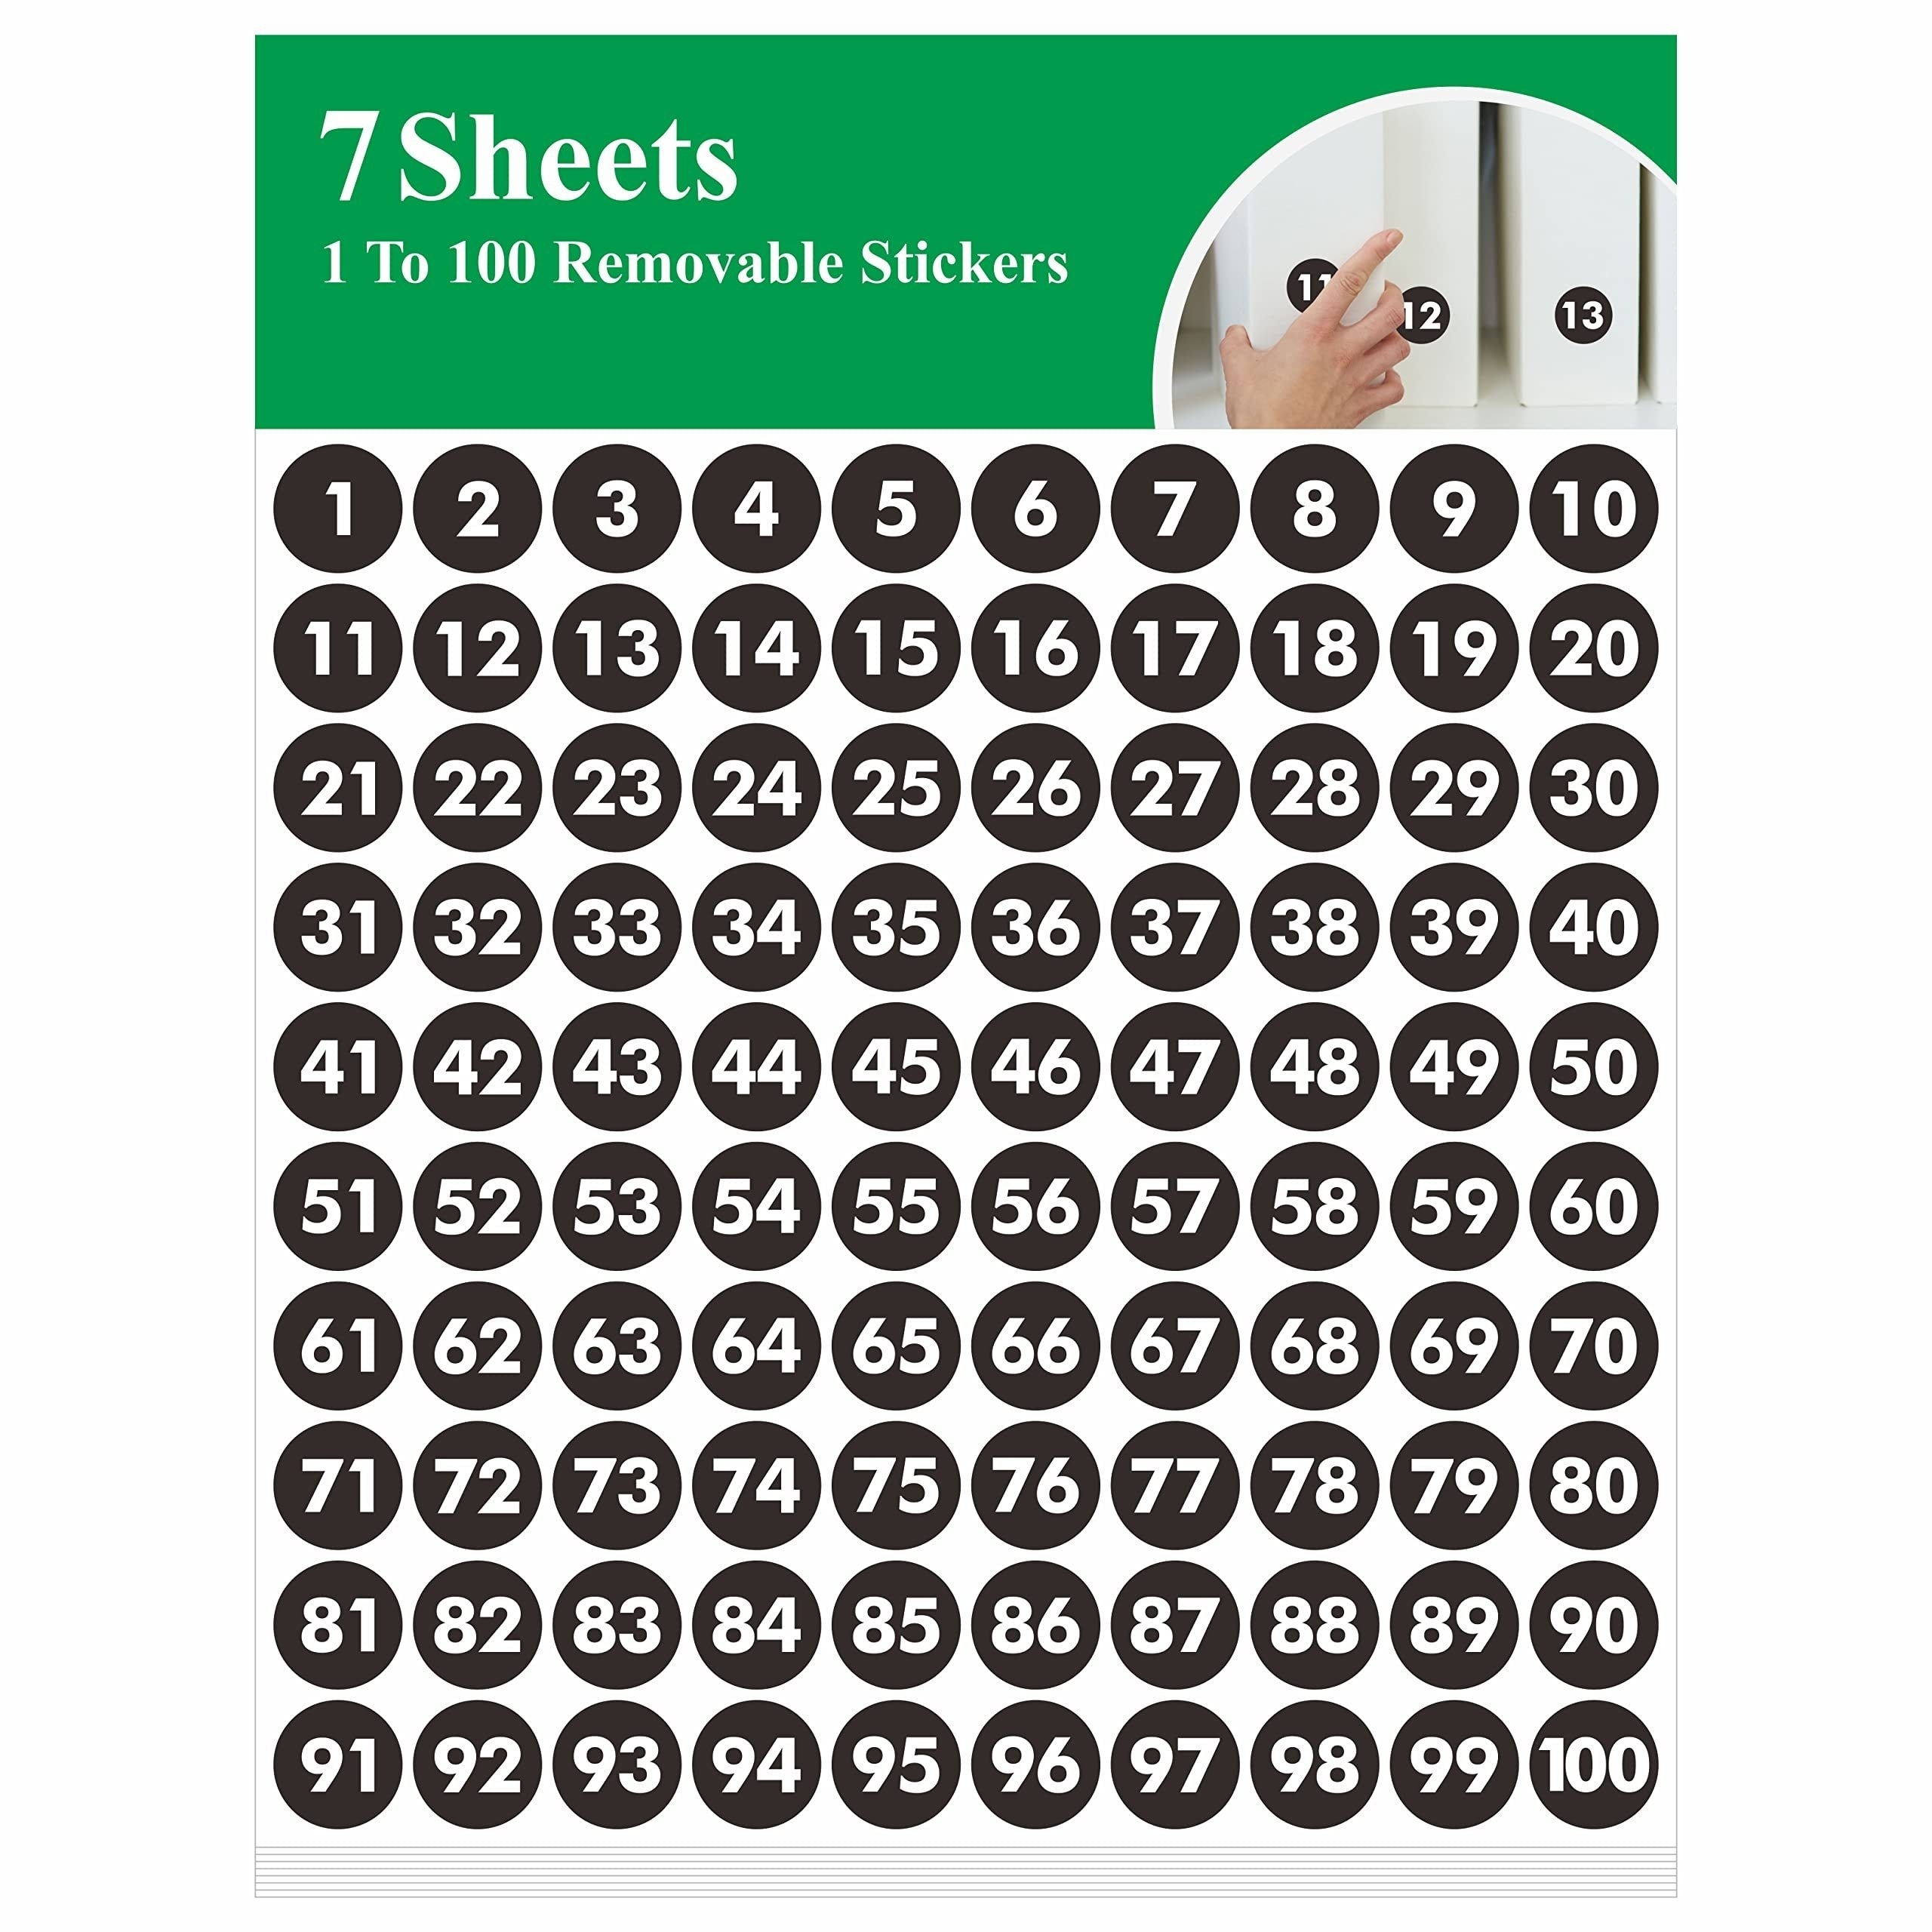 Vinyl Consecutive Number Stickers Small Self-Adhesive Number Labels  Waterproof Inventory Stickers Decal For Indoor Storage - Buy Vinyl  Consecutive Number Stickers Small Self-Adhesive Number Labels Waterproof  Inventory Stickers Decal For Indoor Storage